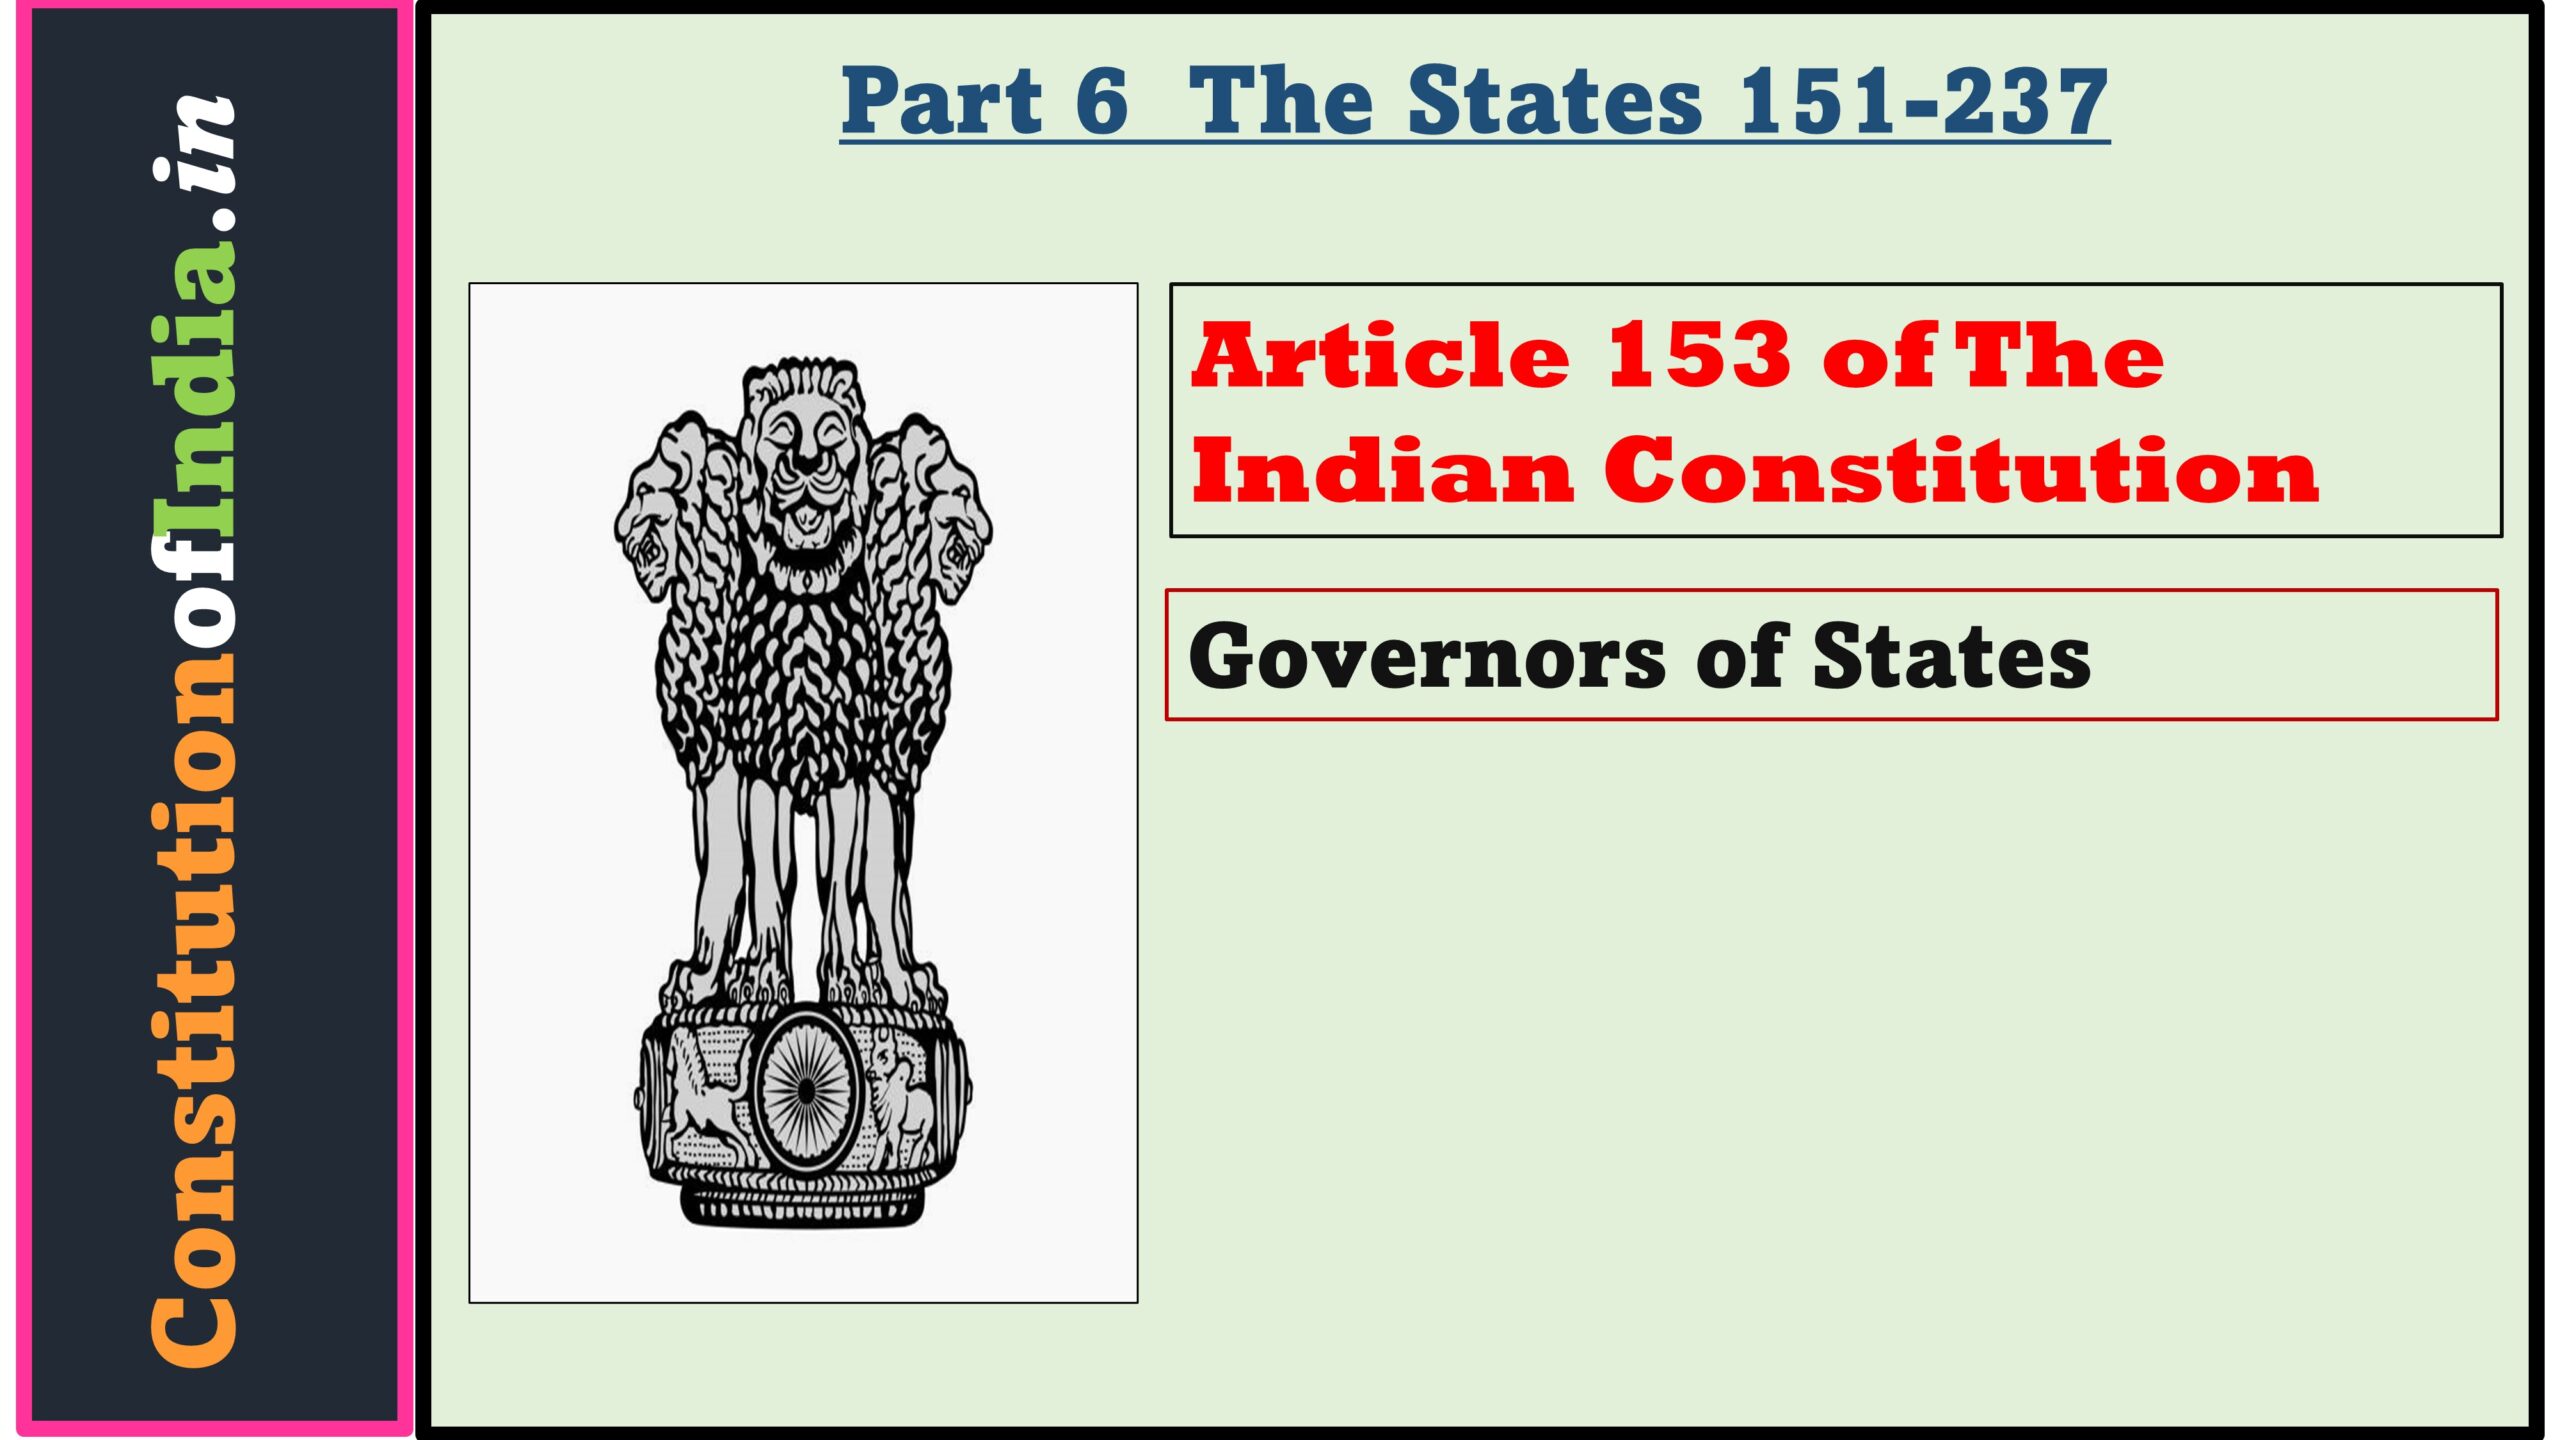 Article 153 of The Indian Constitution